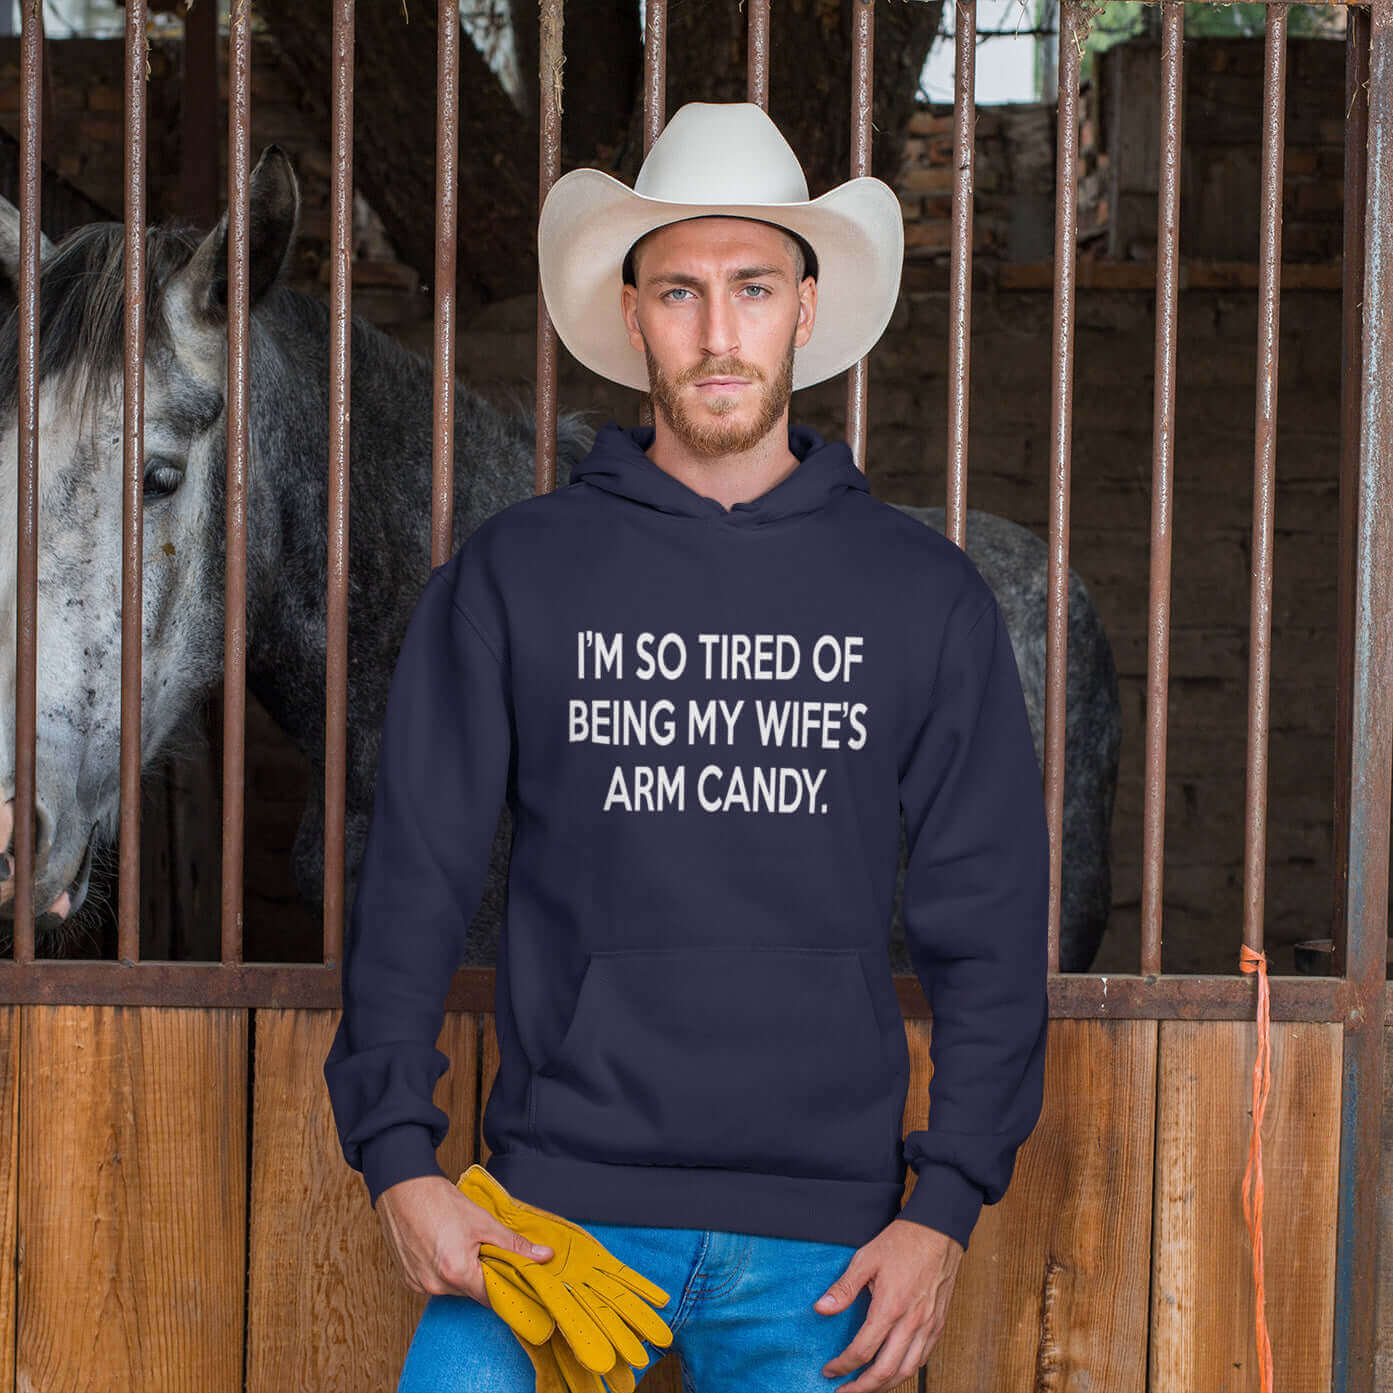 Man wearing a cowboy hat standing in a stable. He is wearing a navy blue hoodie sweatshirt with the funny phrase I'm so tired of being my wife's arm candy printed on the front.